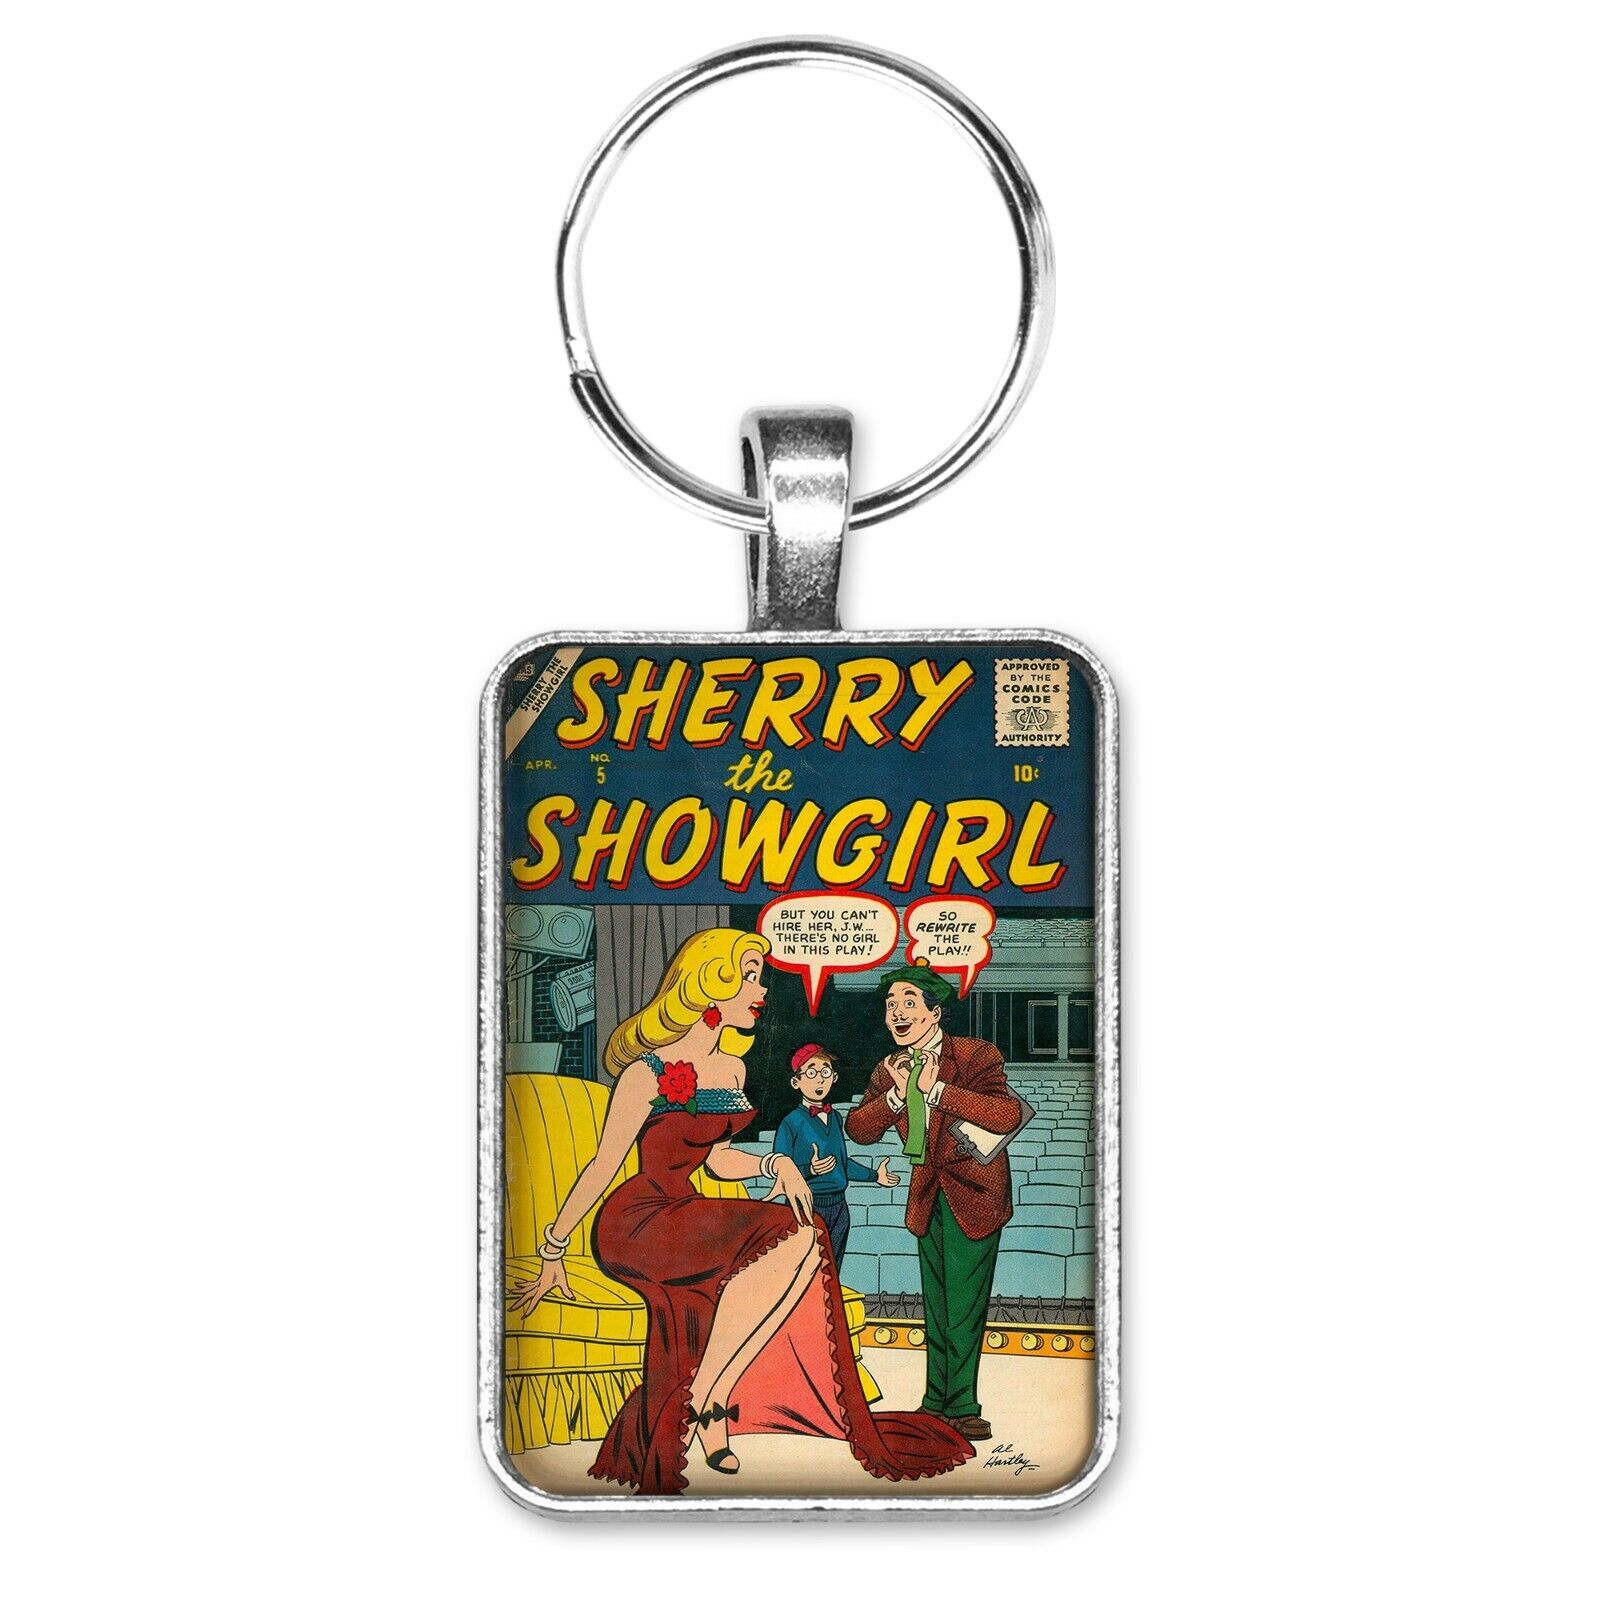 Sherry The Showgirl #5 Cover Key Ring or Necklace Dating Humor Old Comic Book